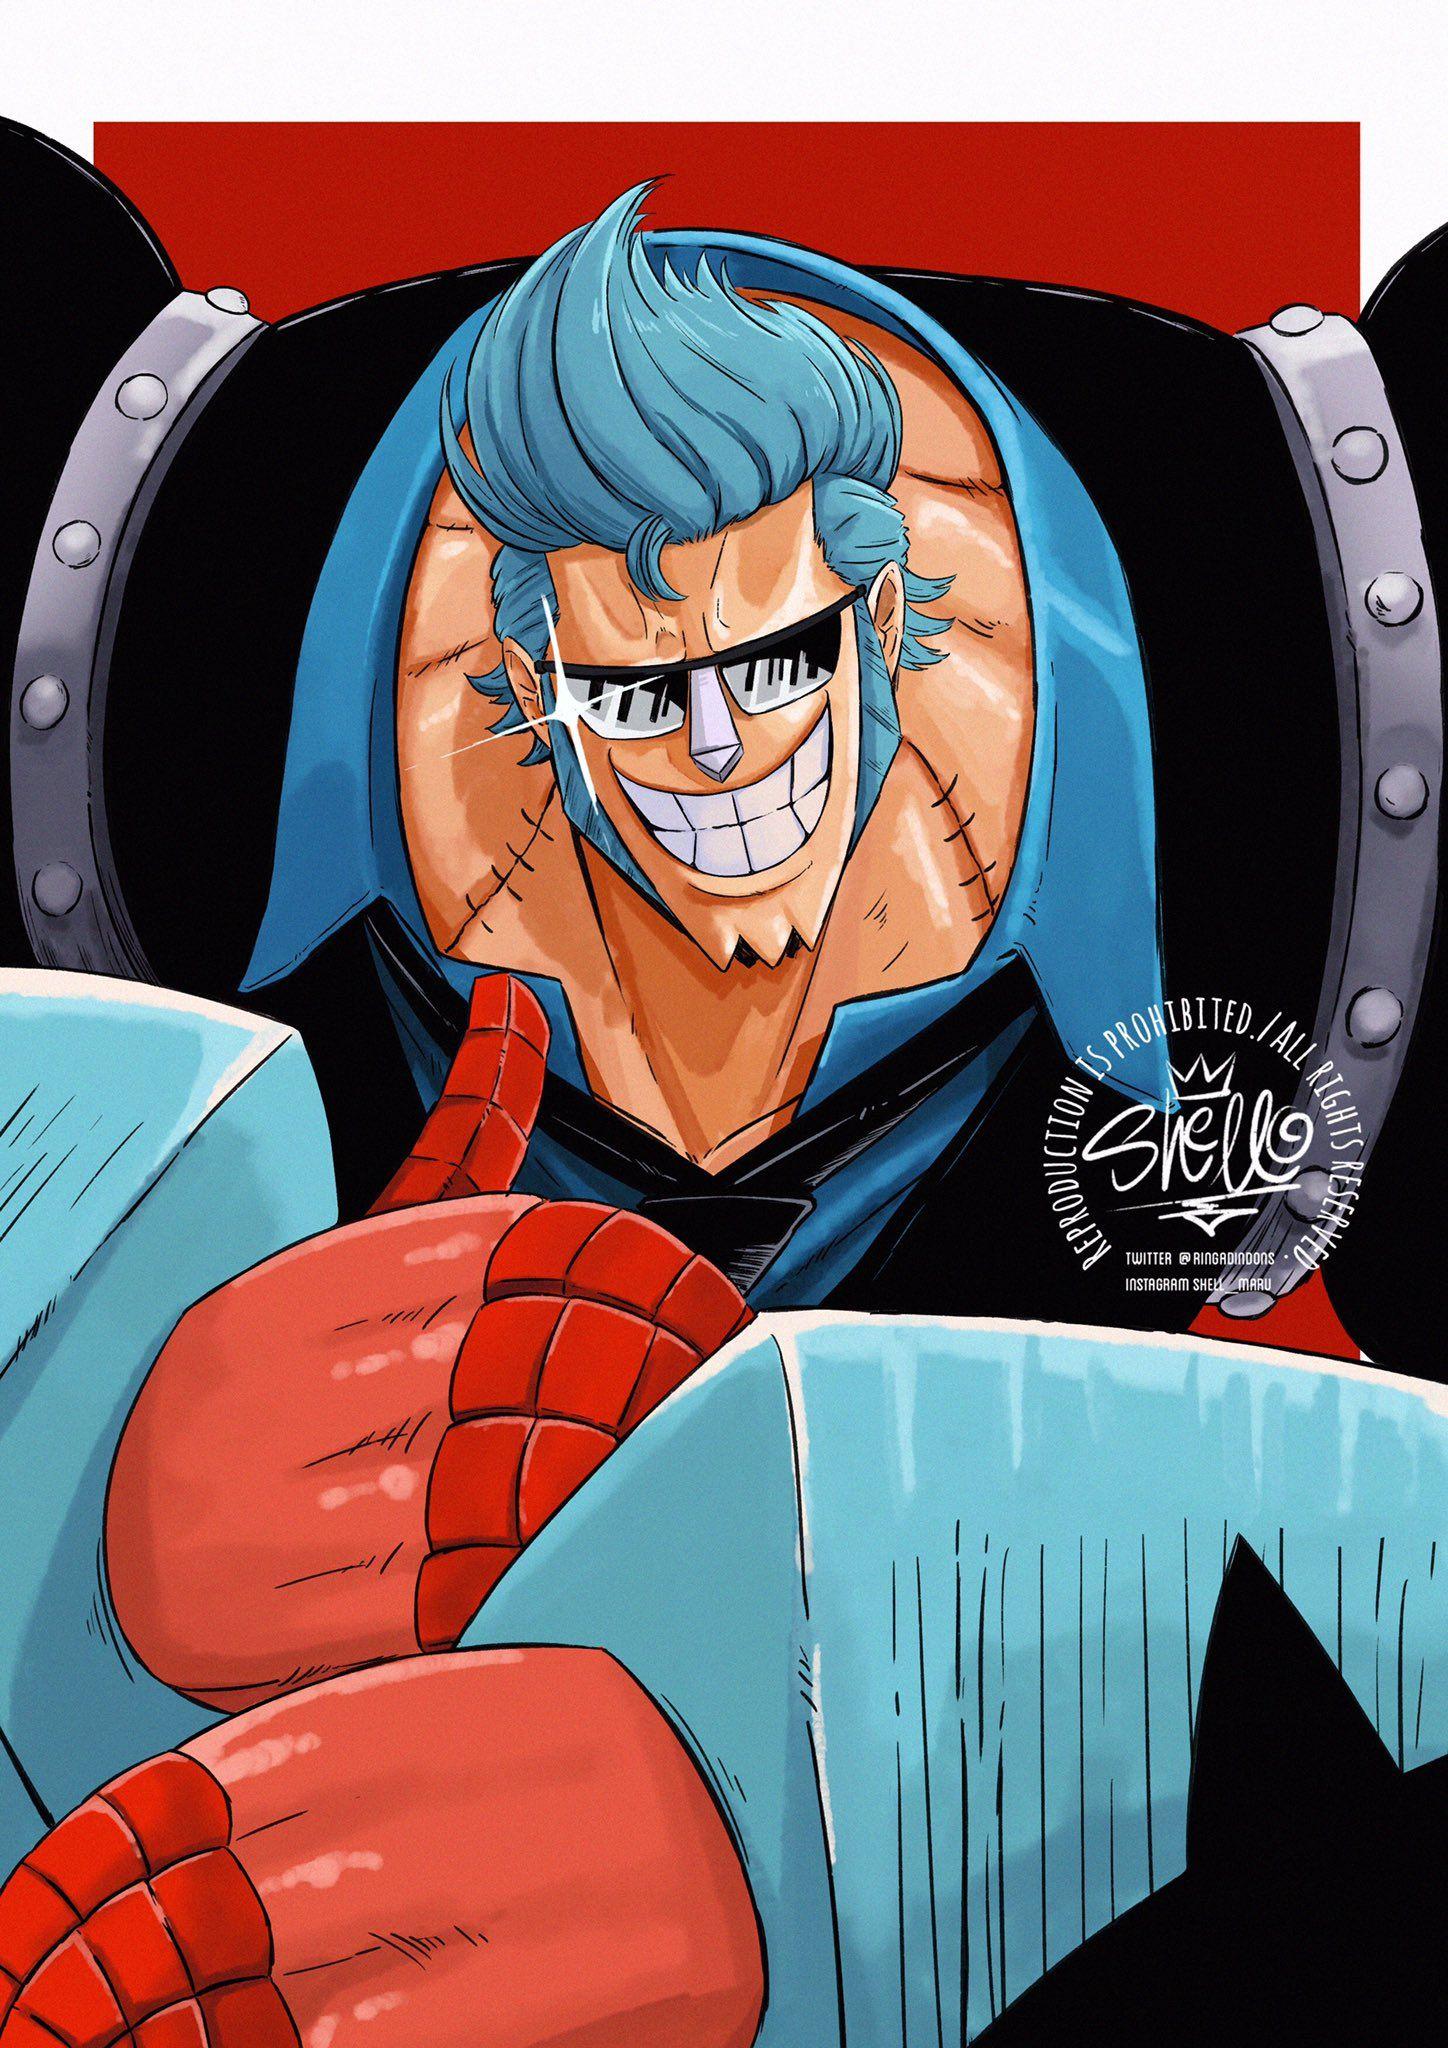 Franky One Piece Wallpapers Top Free Franky One Piece Backgrounds